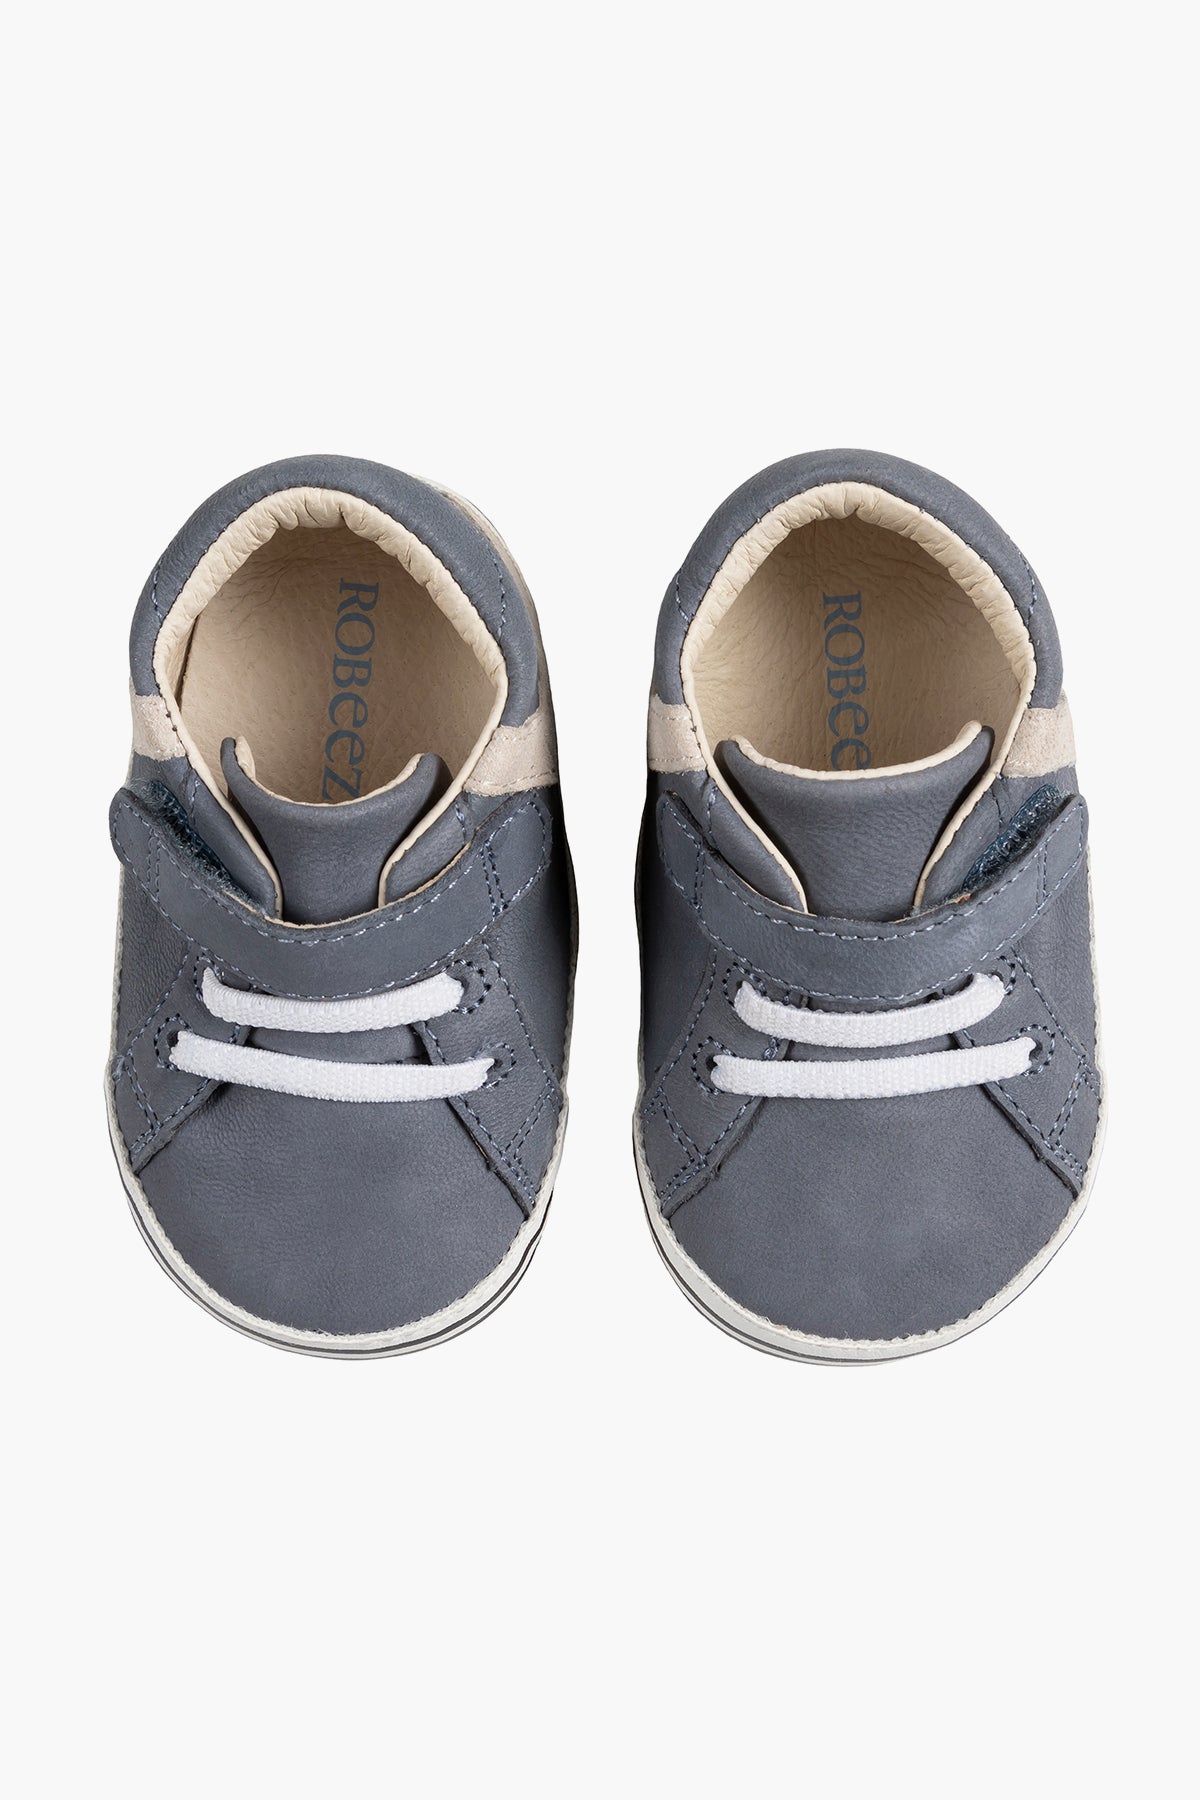 roby shoes for babies